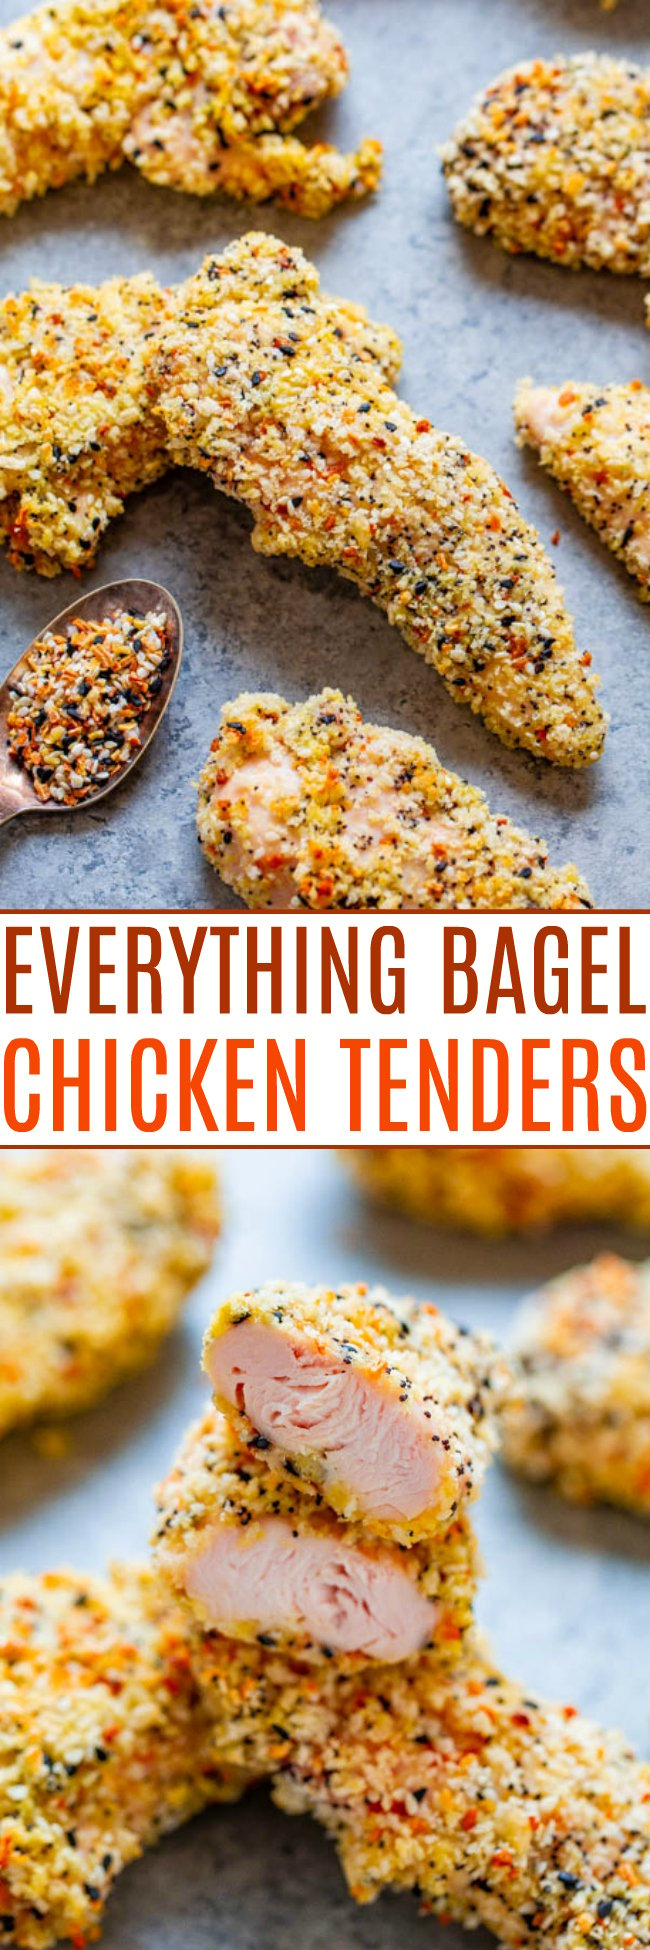 Everything Bagel Baked Chicken Tenders – EASY, ready in 15 minutes, and perfectly CRISPY on the outside!! Tastes like an everything bagel met chicken on the way to the oven and so GOOD! Don’t bother frying chicken when you can bake it!!